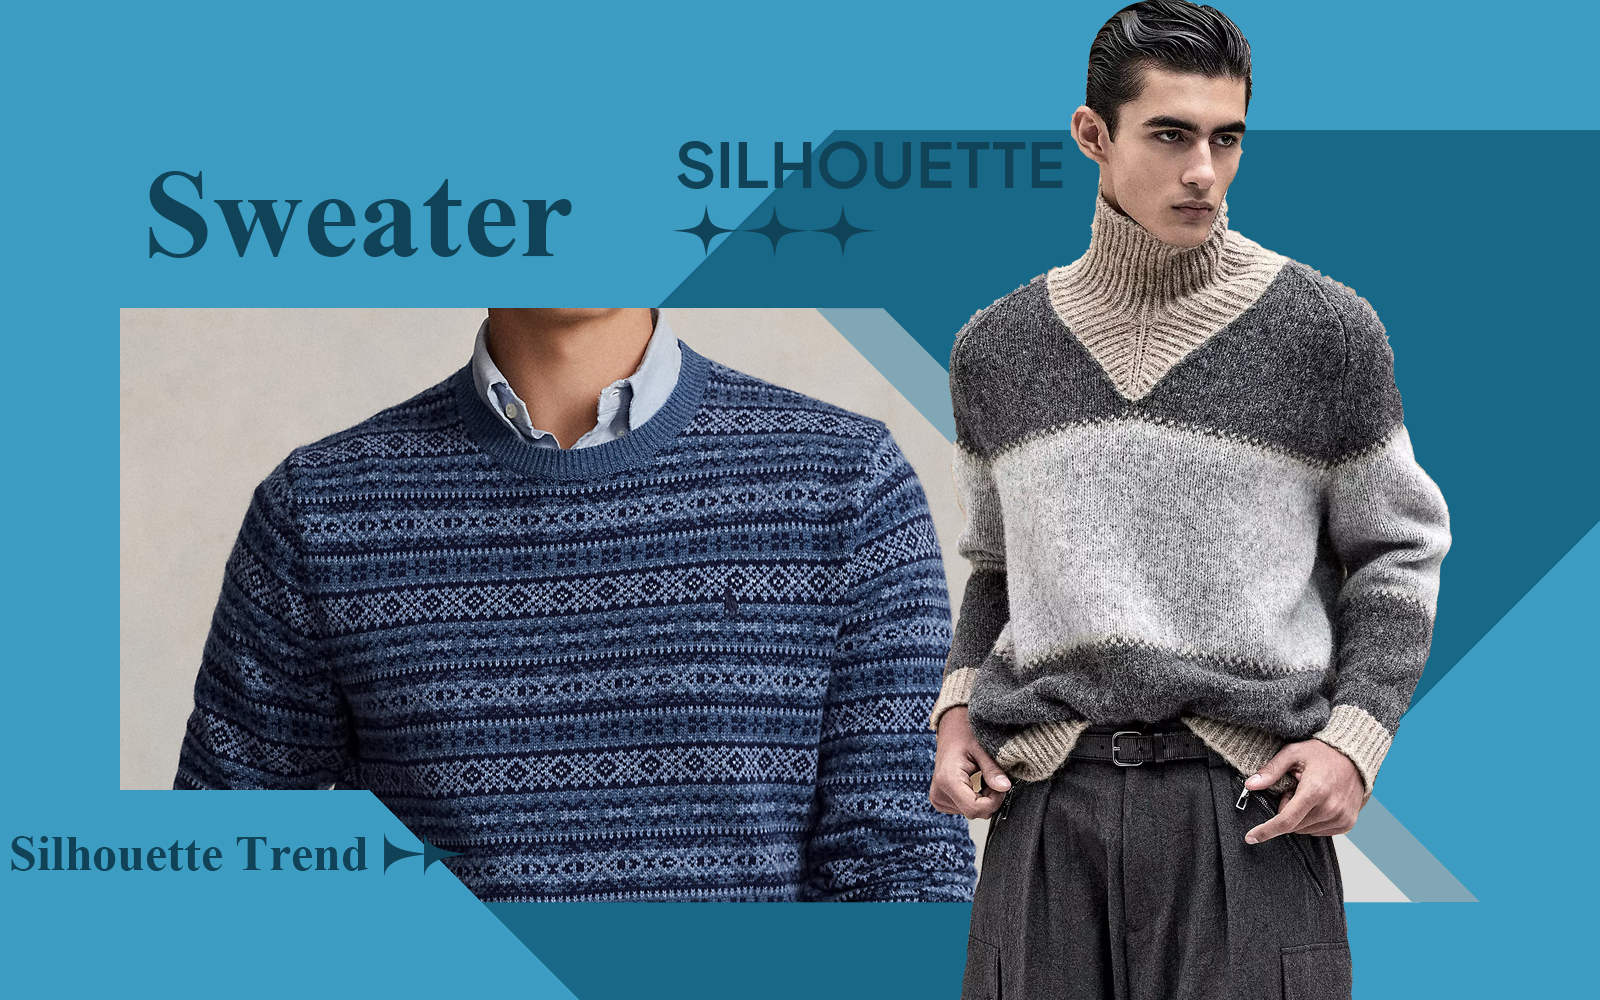 Business Fashion -- The Silhouette Trend for Men's Sweater